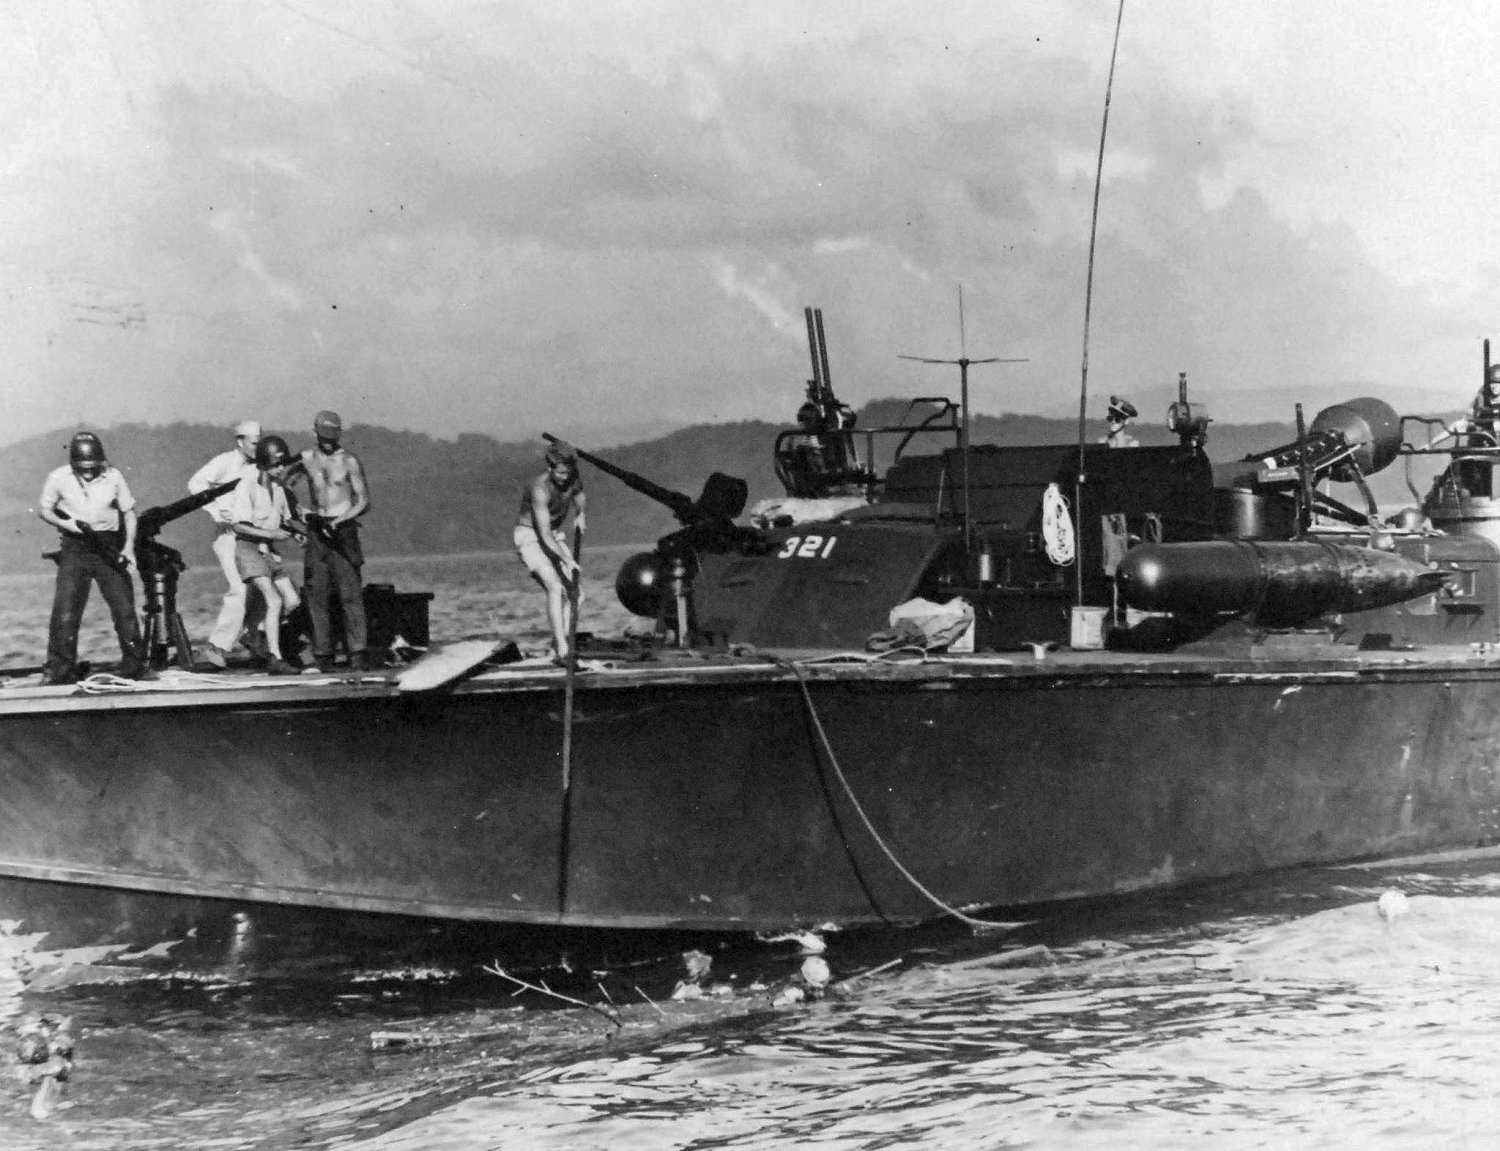 PT-321, an Elco 80-footer of Motor Torpedo Boat Squadron 21 (MTBRon 21), picking up Japanese survivors in Surigao Strait, Philippines, 25 Oct 1944